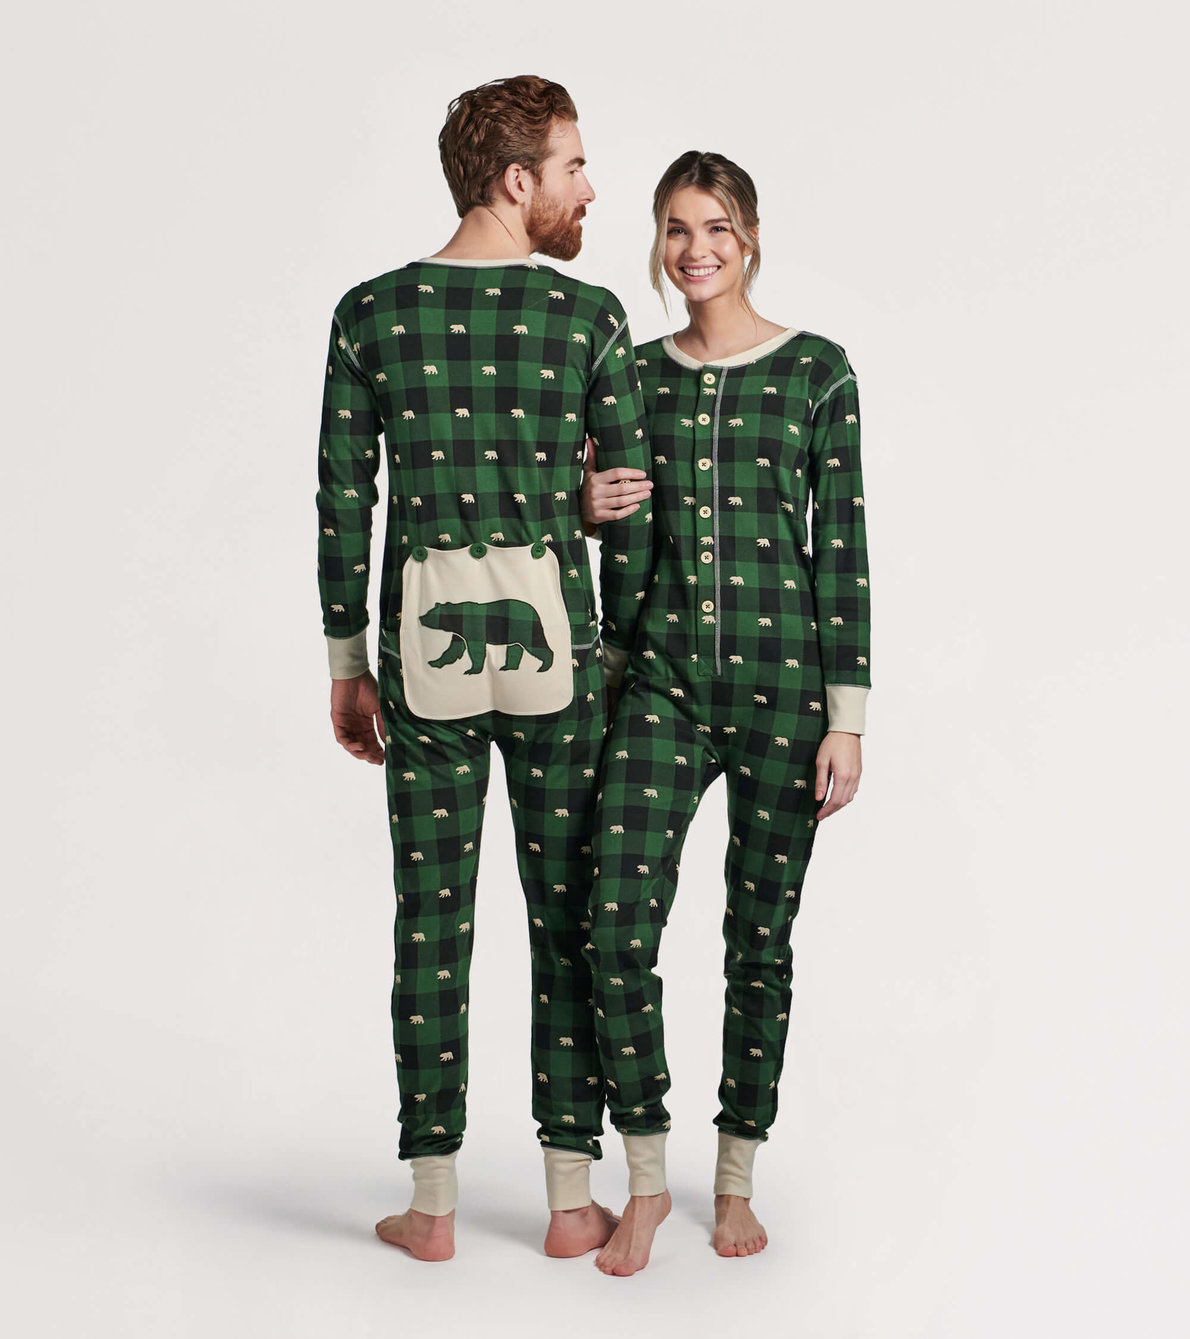 View larger image of Forest Green Plaid Adult Union Suit